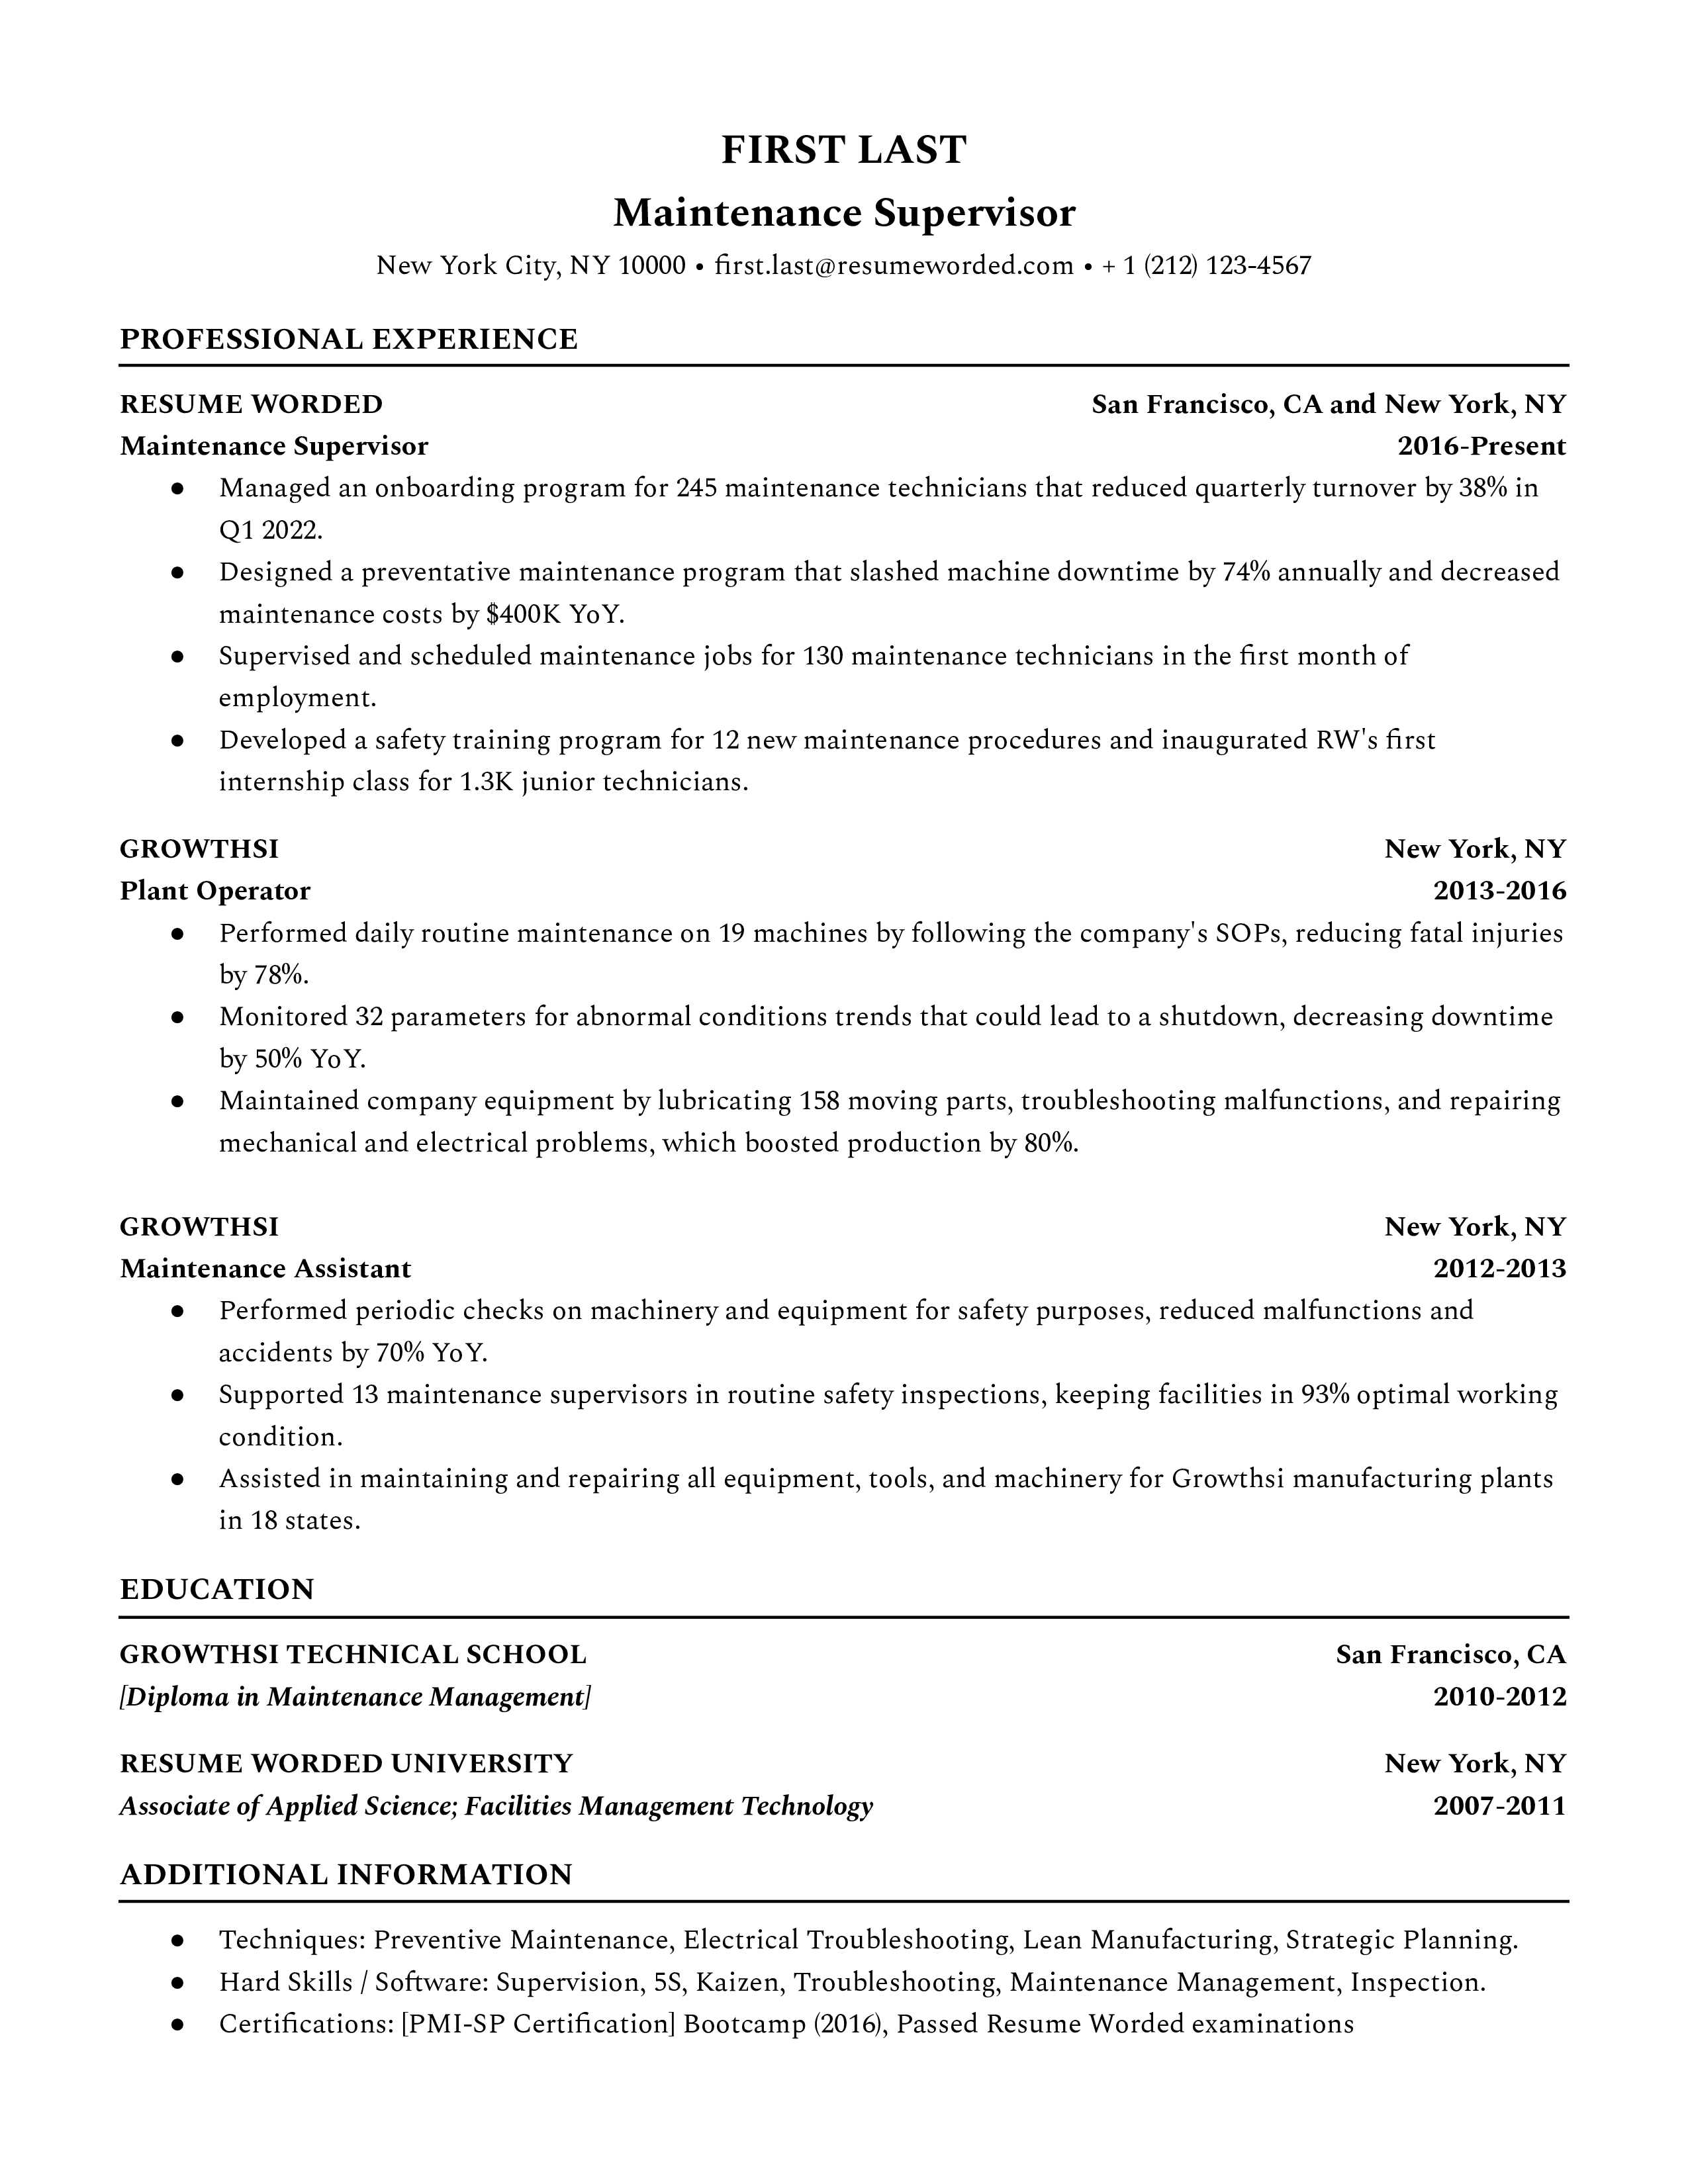 A maintenance supervisor resume template that prioritizes work experience